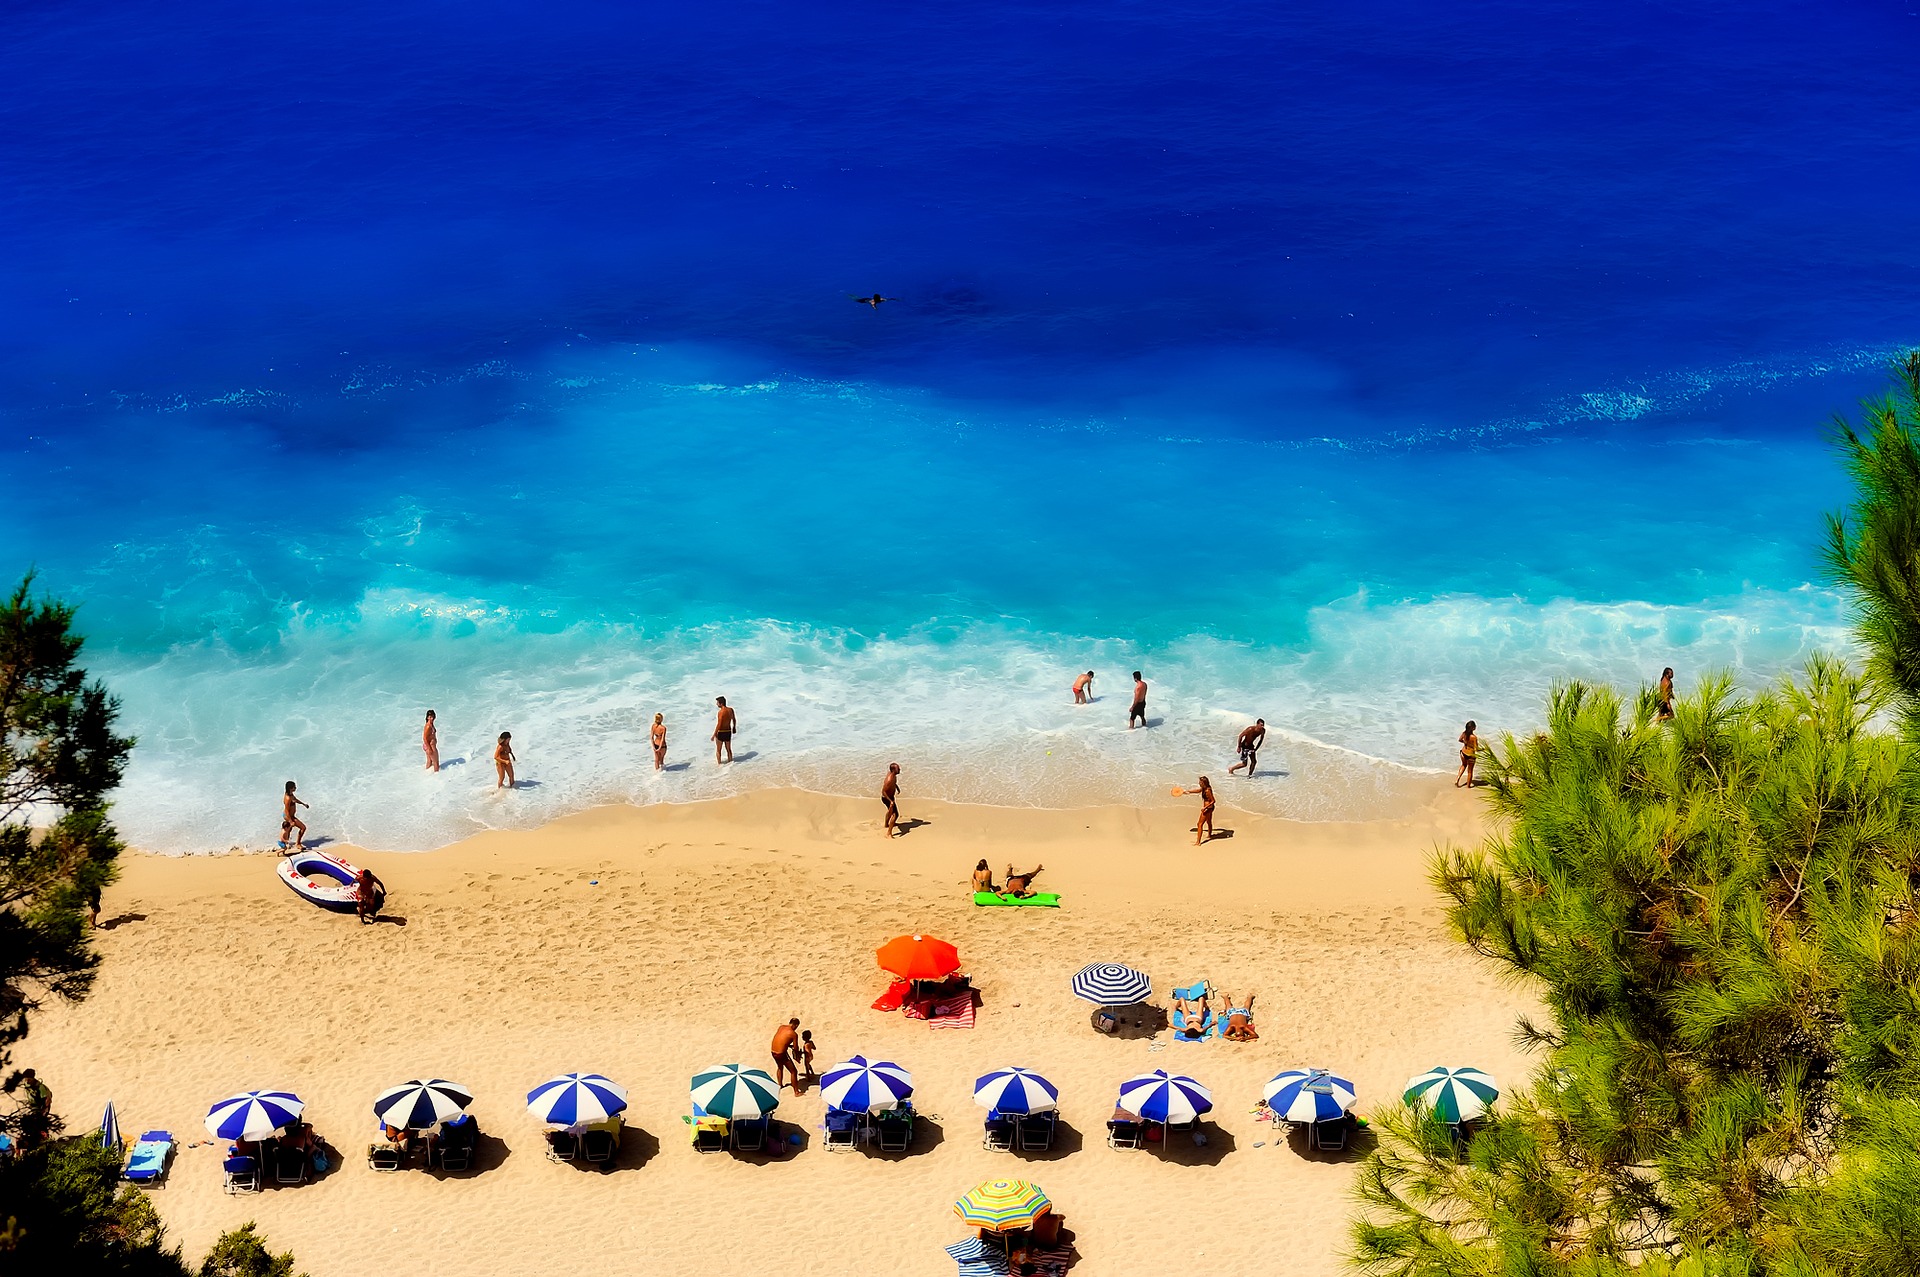 People relaxing on a beach from a birds eye view